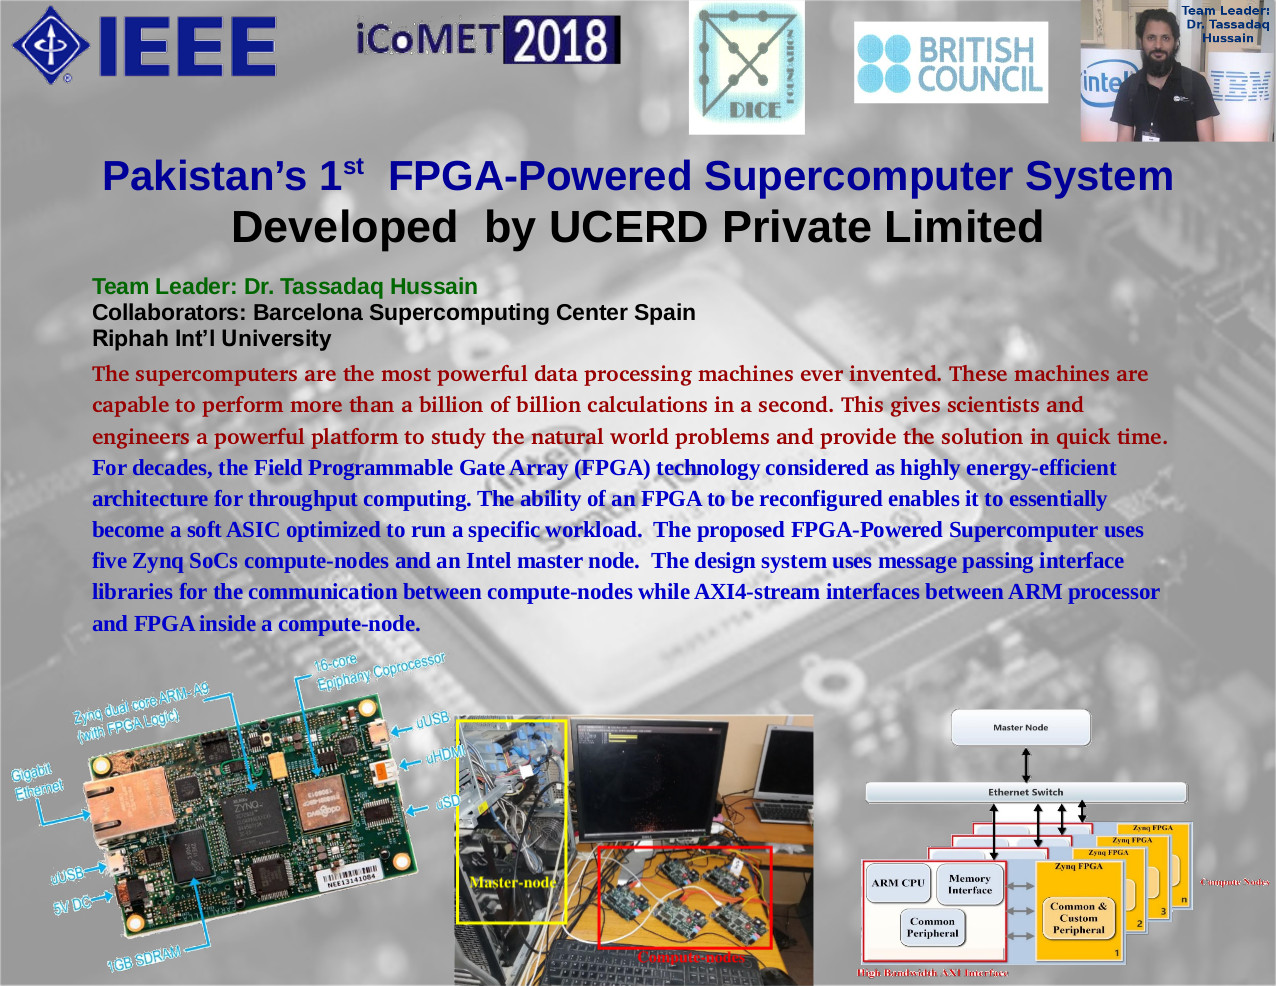 Pakistan’s 1 st FPGA-Powered Supercomputer System Developed by UCERD Private Limited